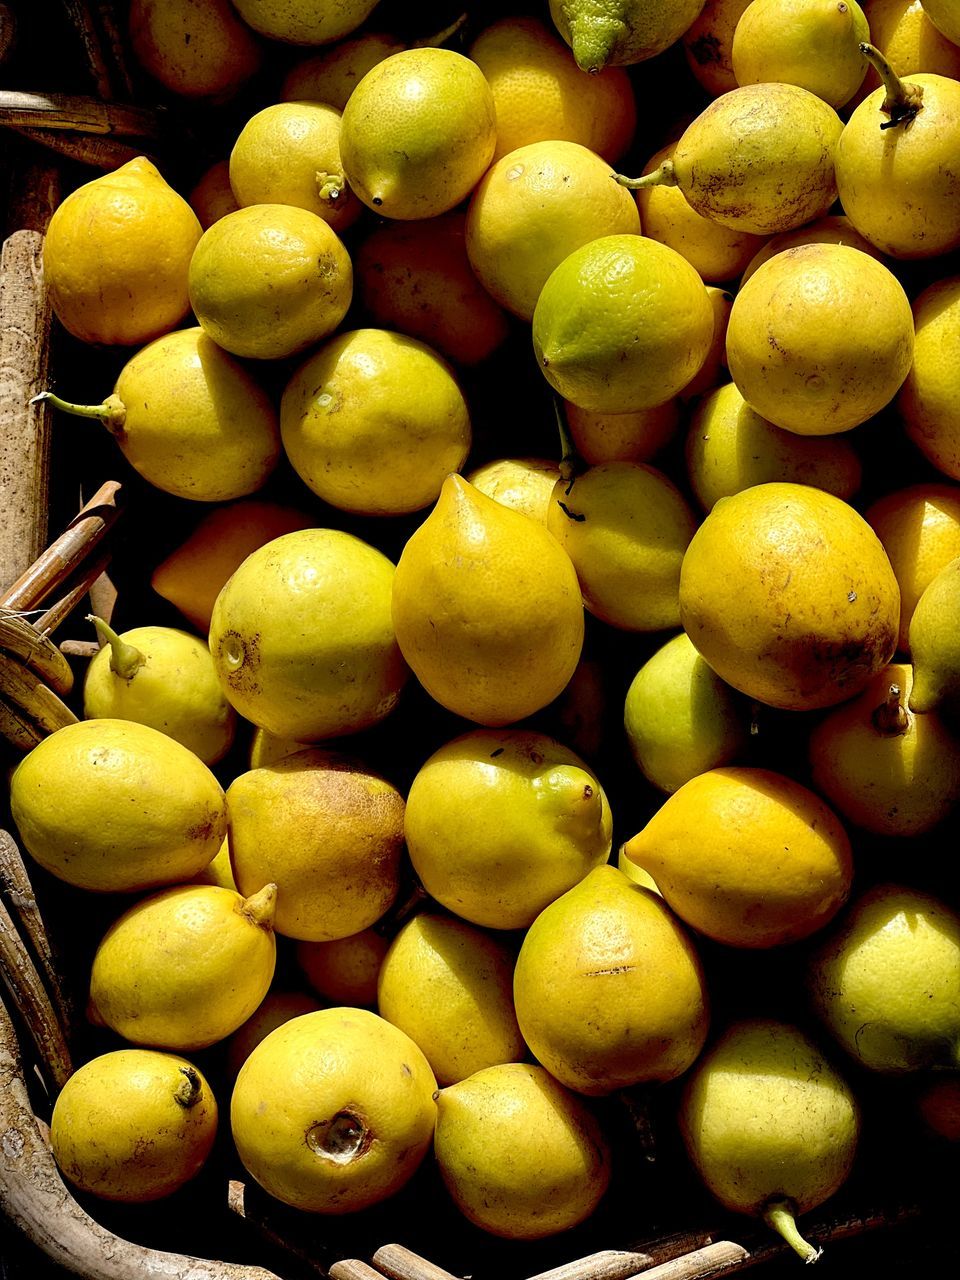 food and drink, food, healthy eating, freshness, fruit, wellbeing, plant, abundance, large group of objects, produce, citrus, yellow, no people, citrus fruit, still life, container, market, lemon, close-up, retail, organic, green, for sale, market stall, high angle view, olive